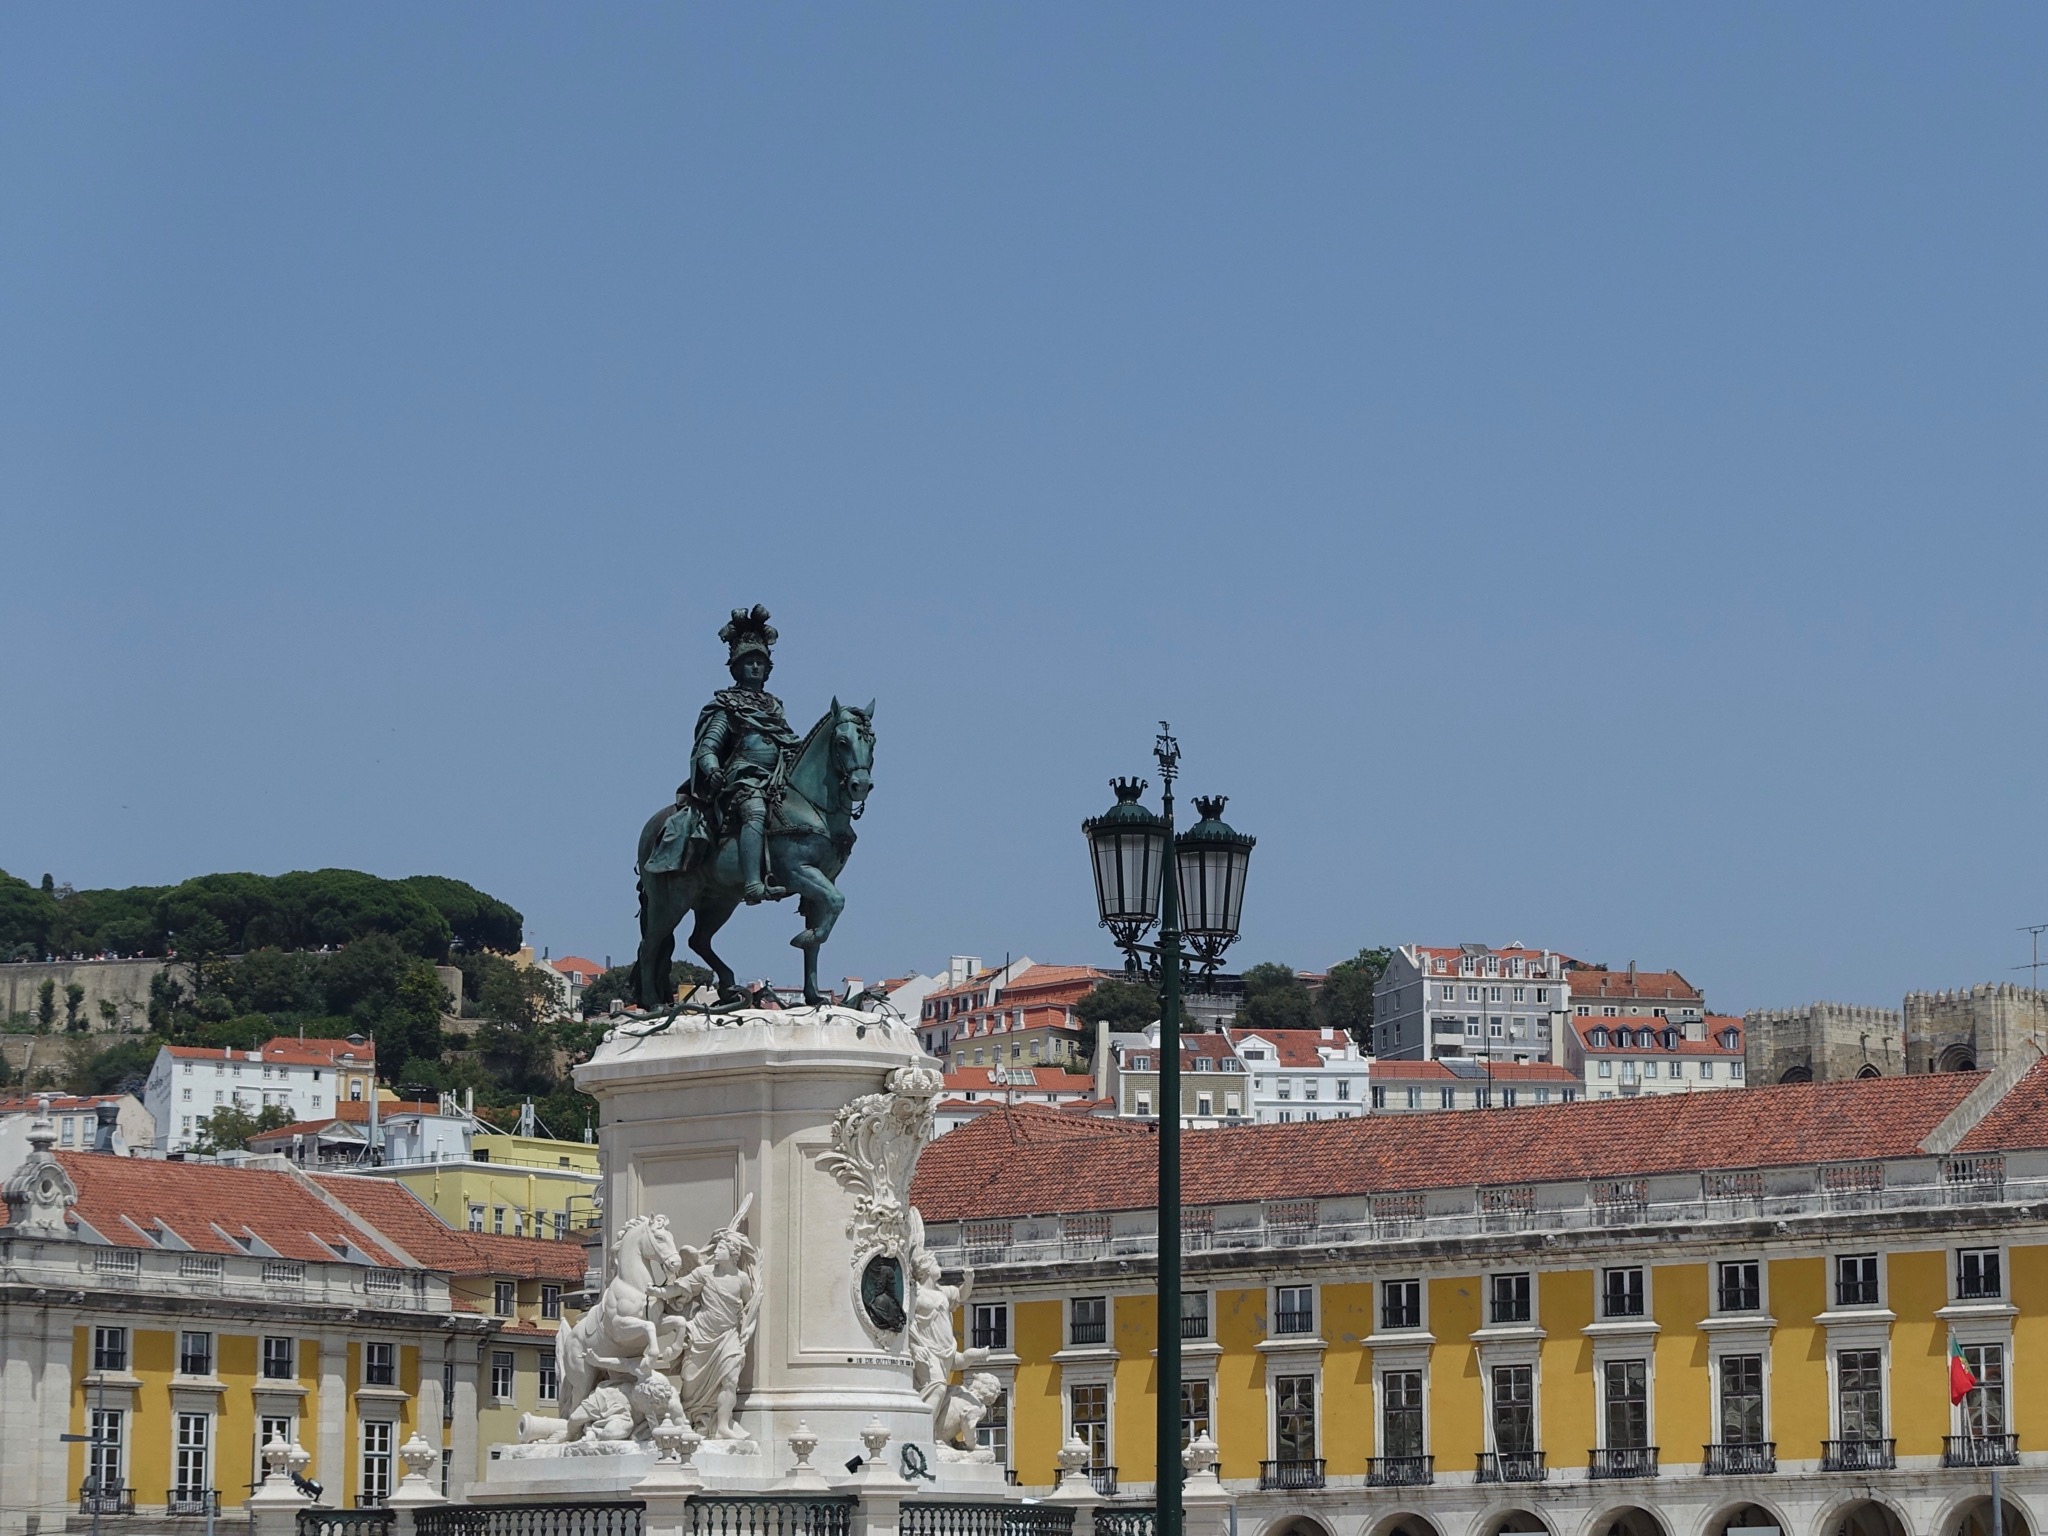 Photo 51 of 86 from the album Highlights Lisbon 2015.